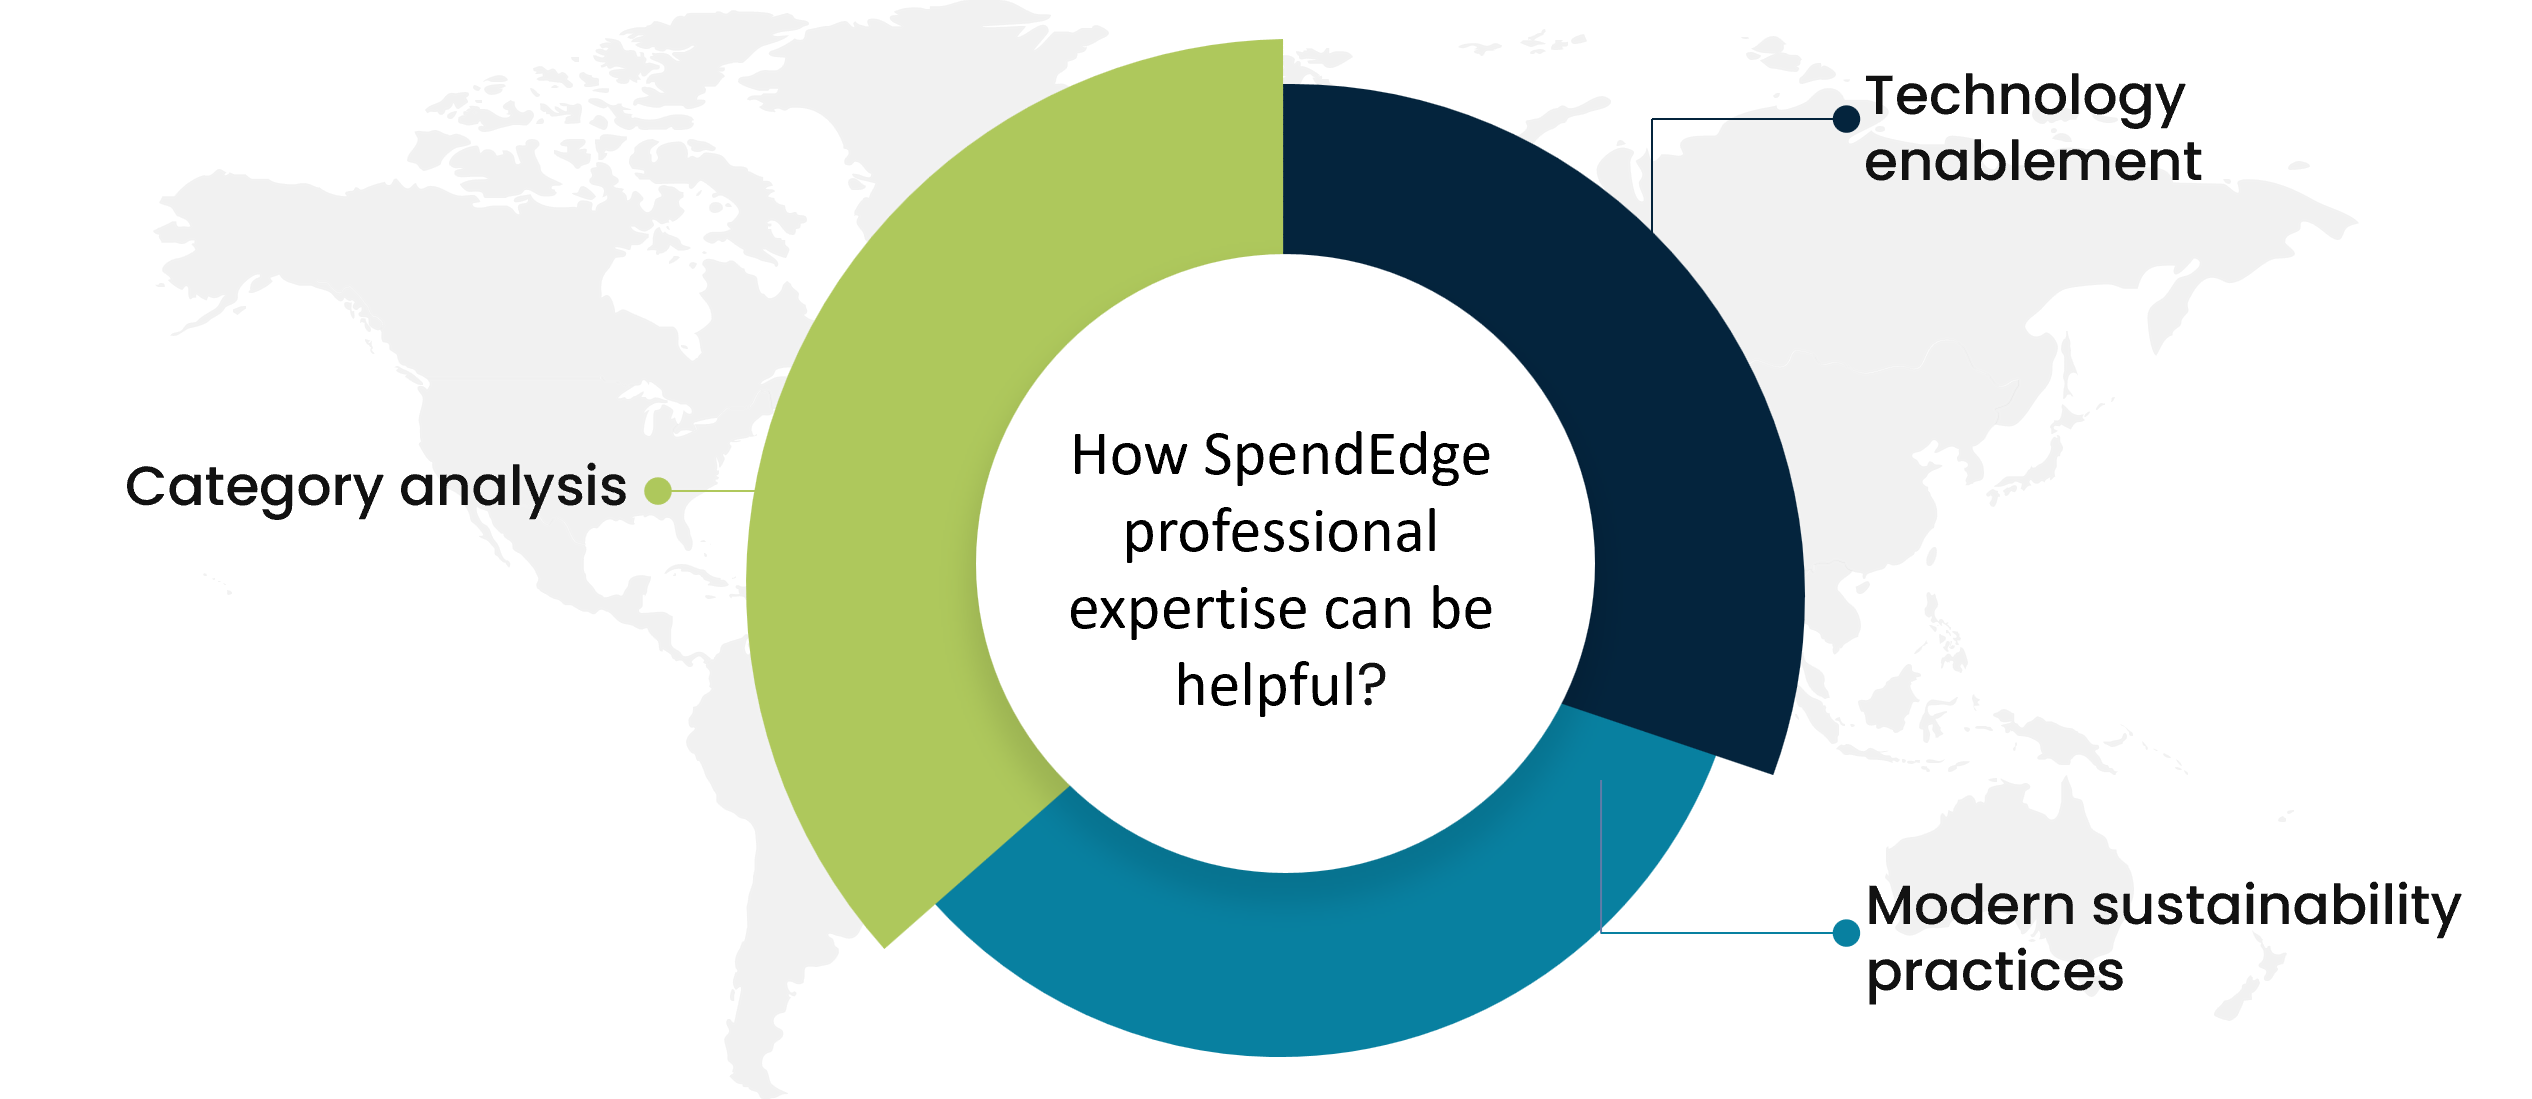 How SpendEdge professional expertise can be helpful